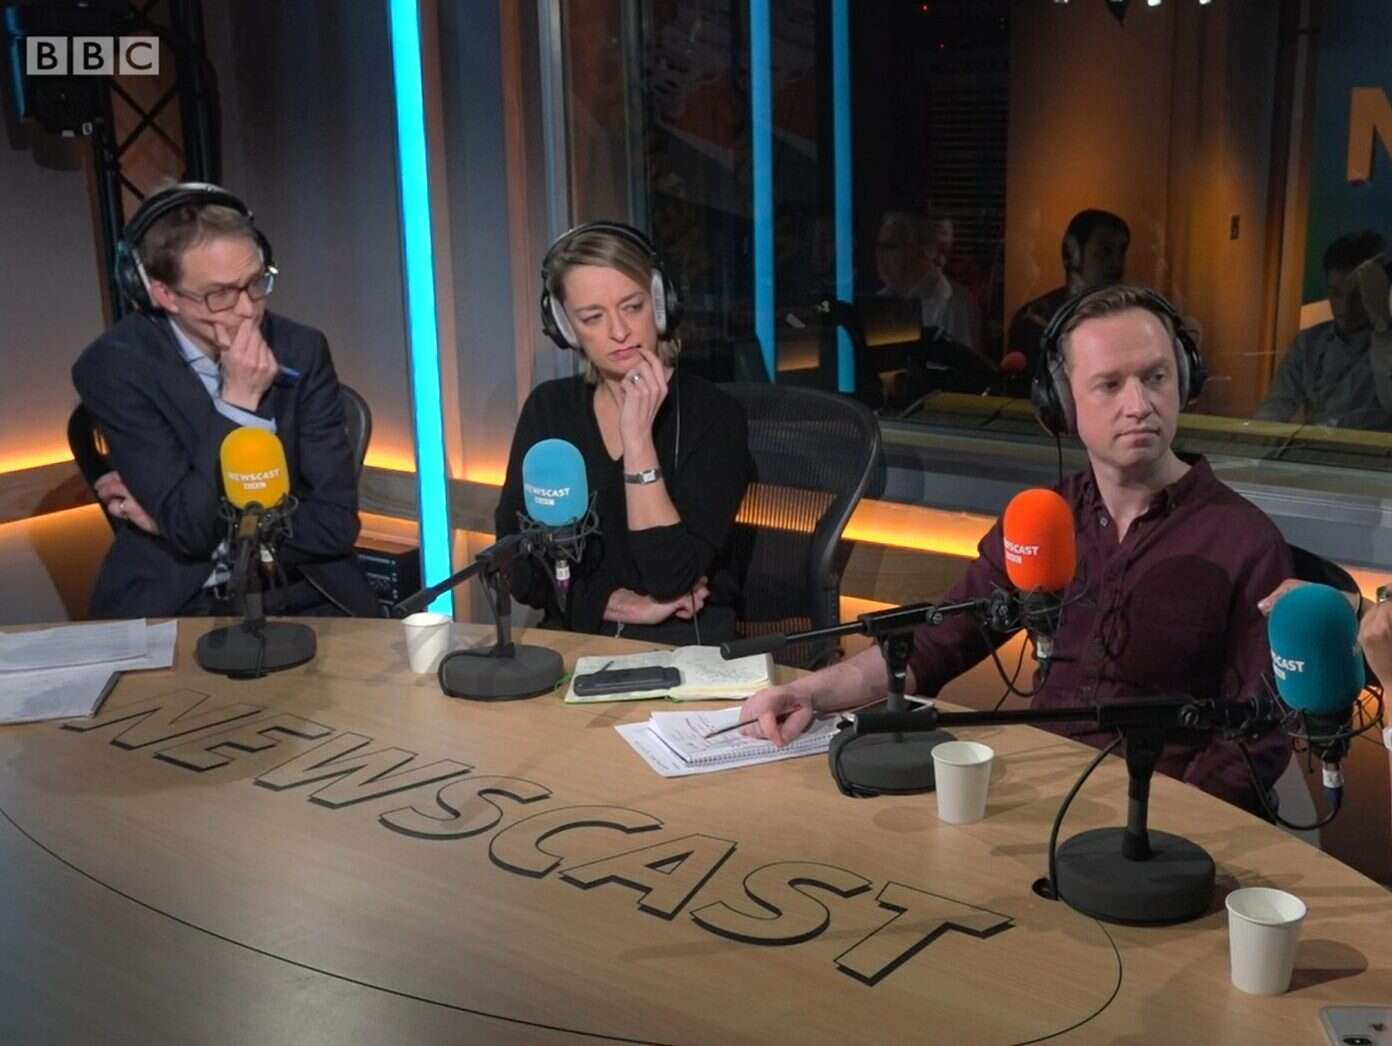 BBC to turn Newscast into daily podcast after success of Brexitcast